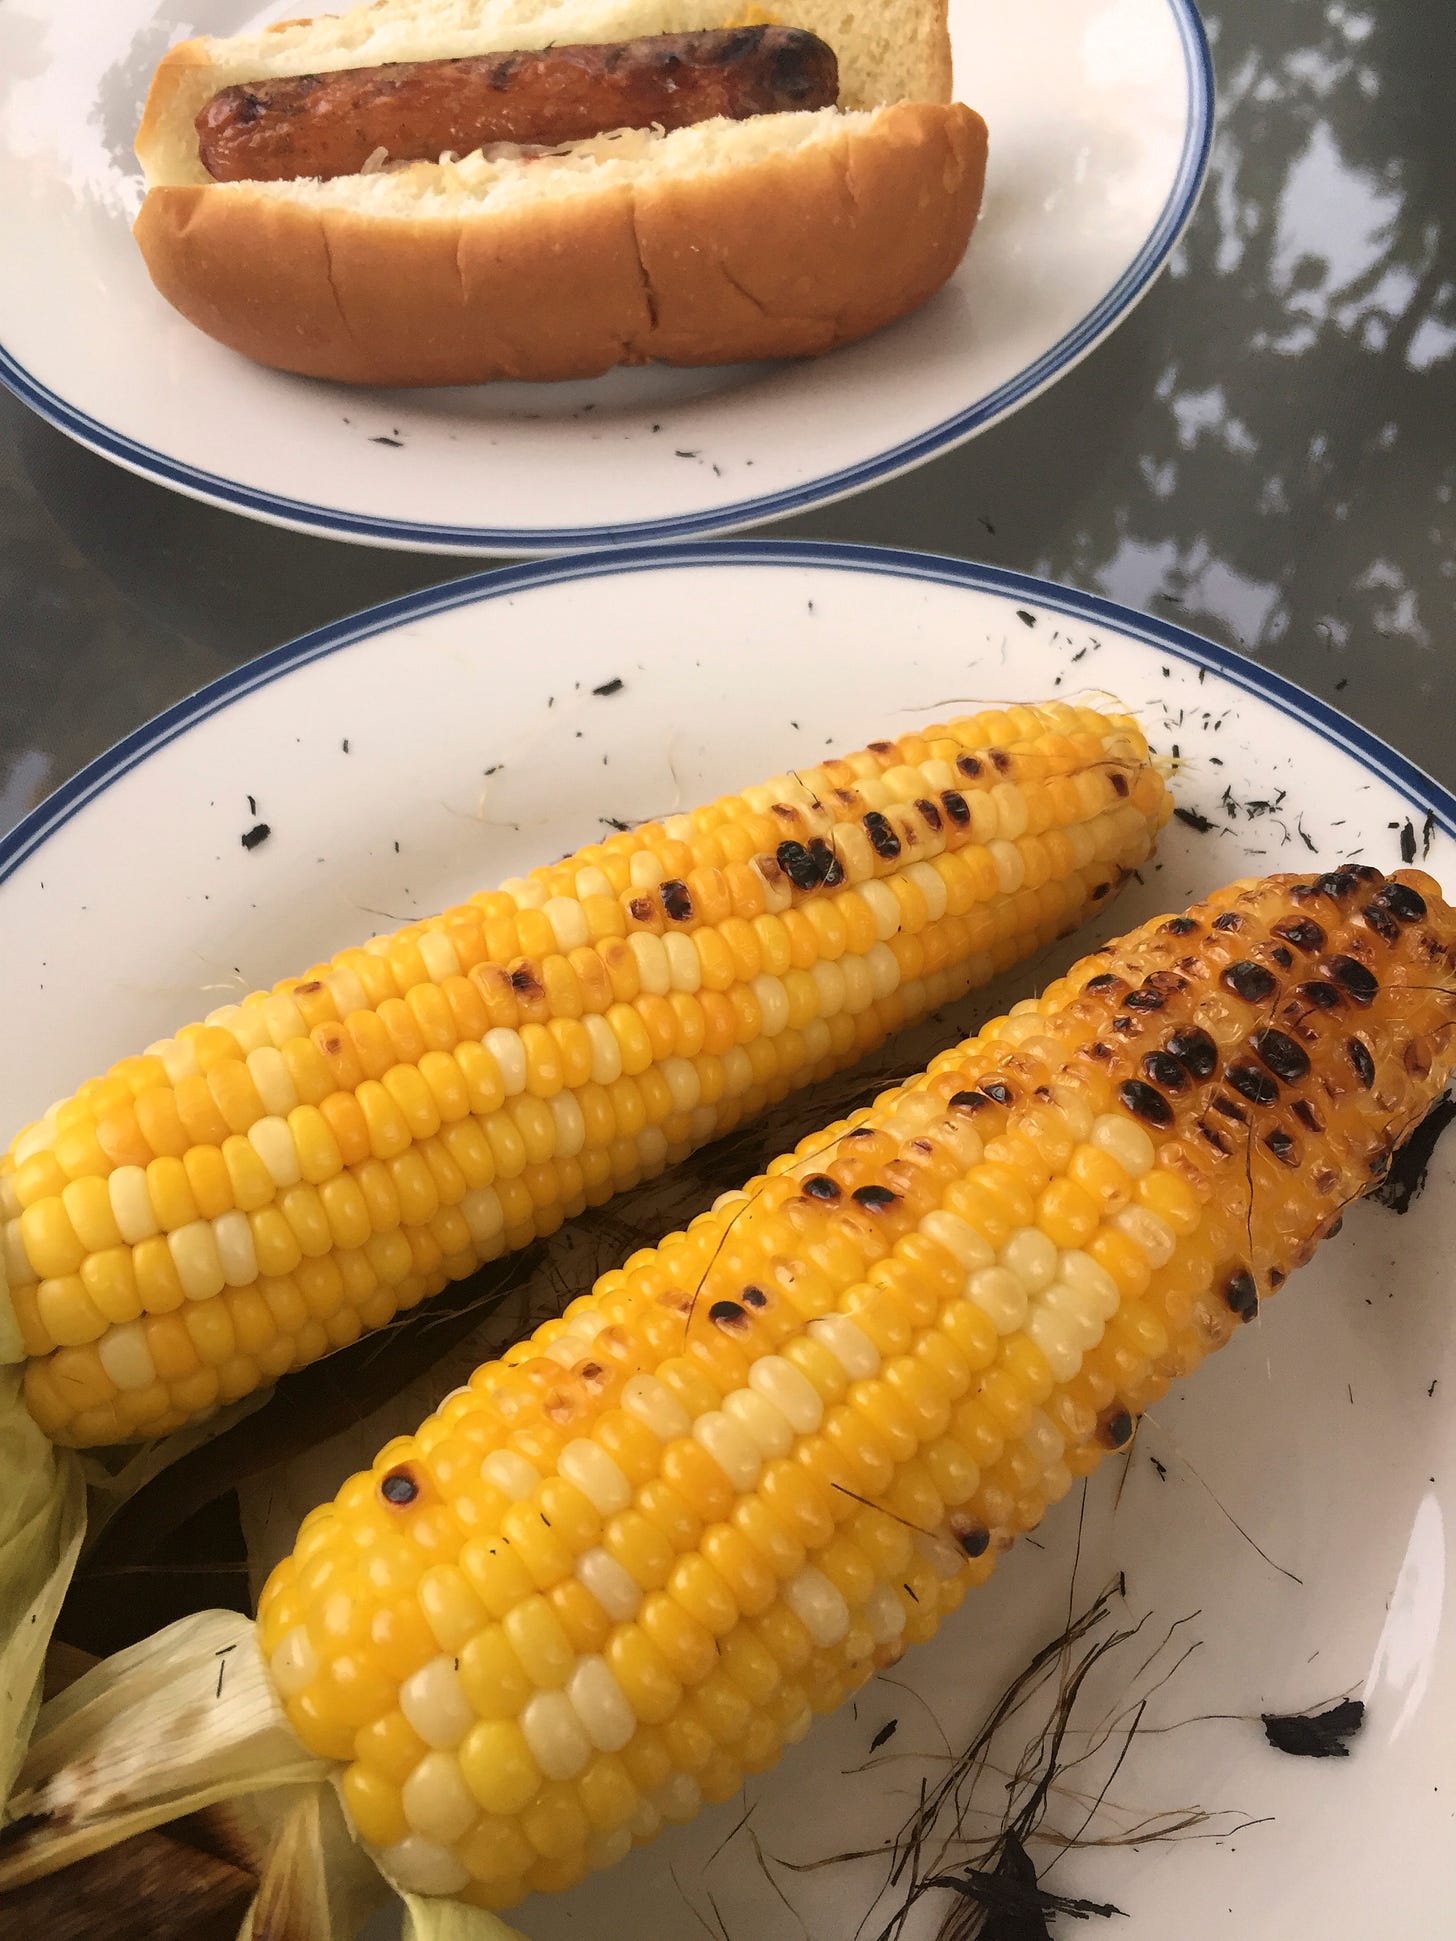 In the foreground, a plate of two ears of grilled corn, blackened in places, the charred husks peeled back at the bottom. Behind it is another plate with a hot dog in a bun.